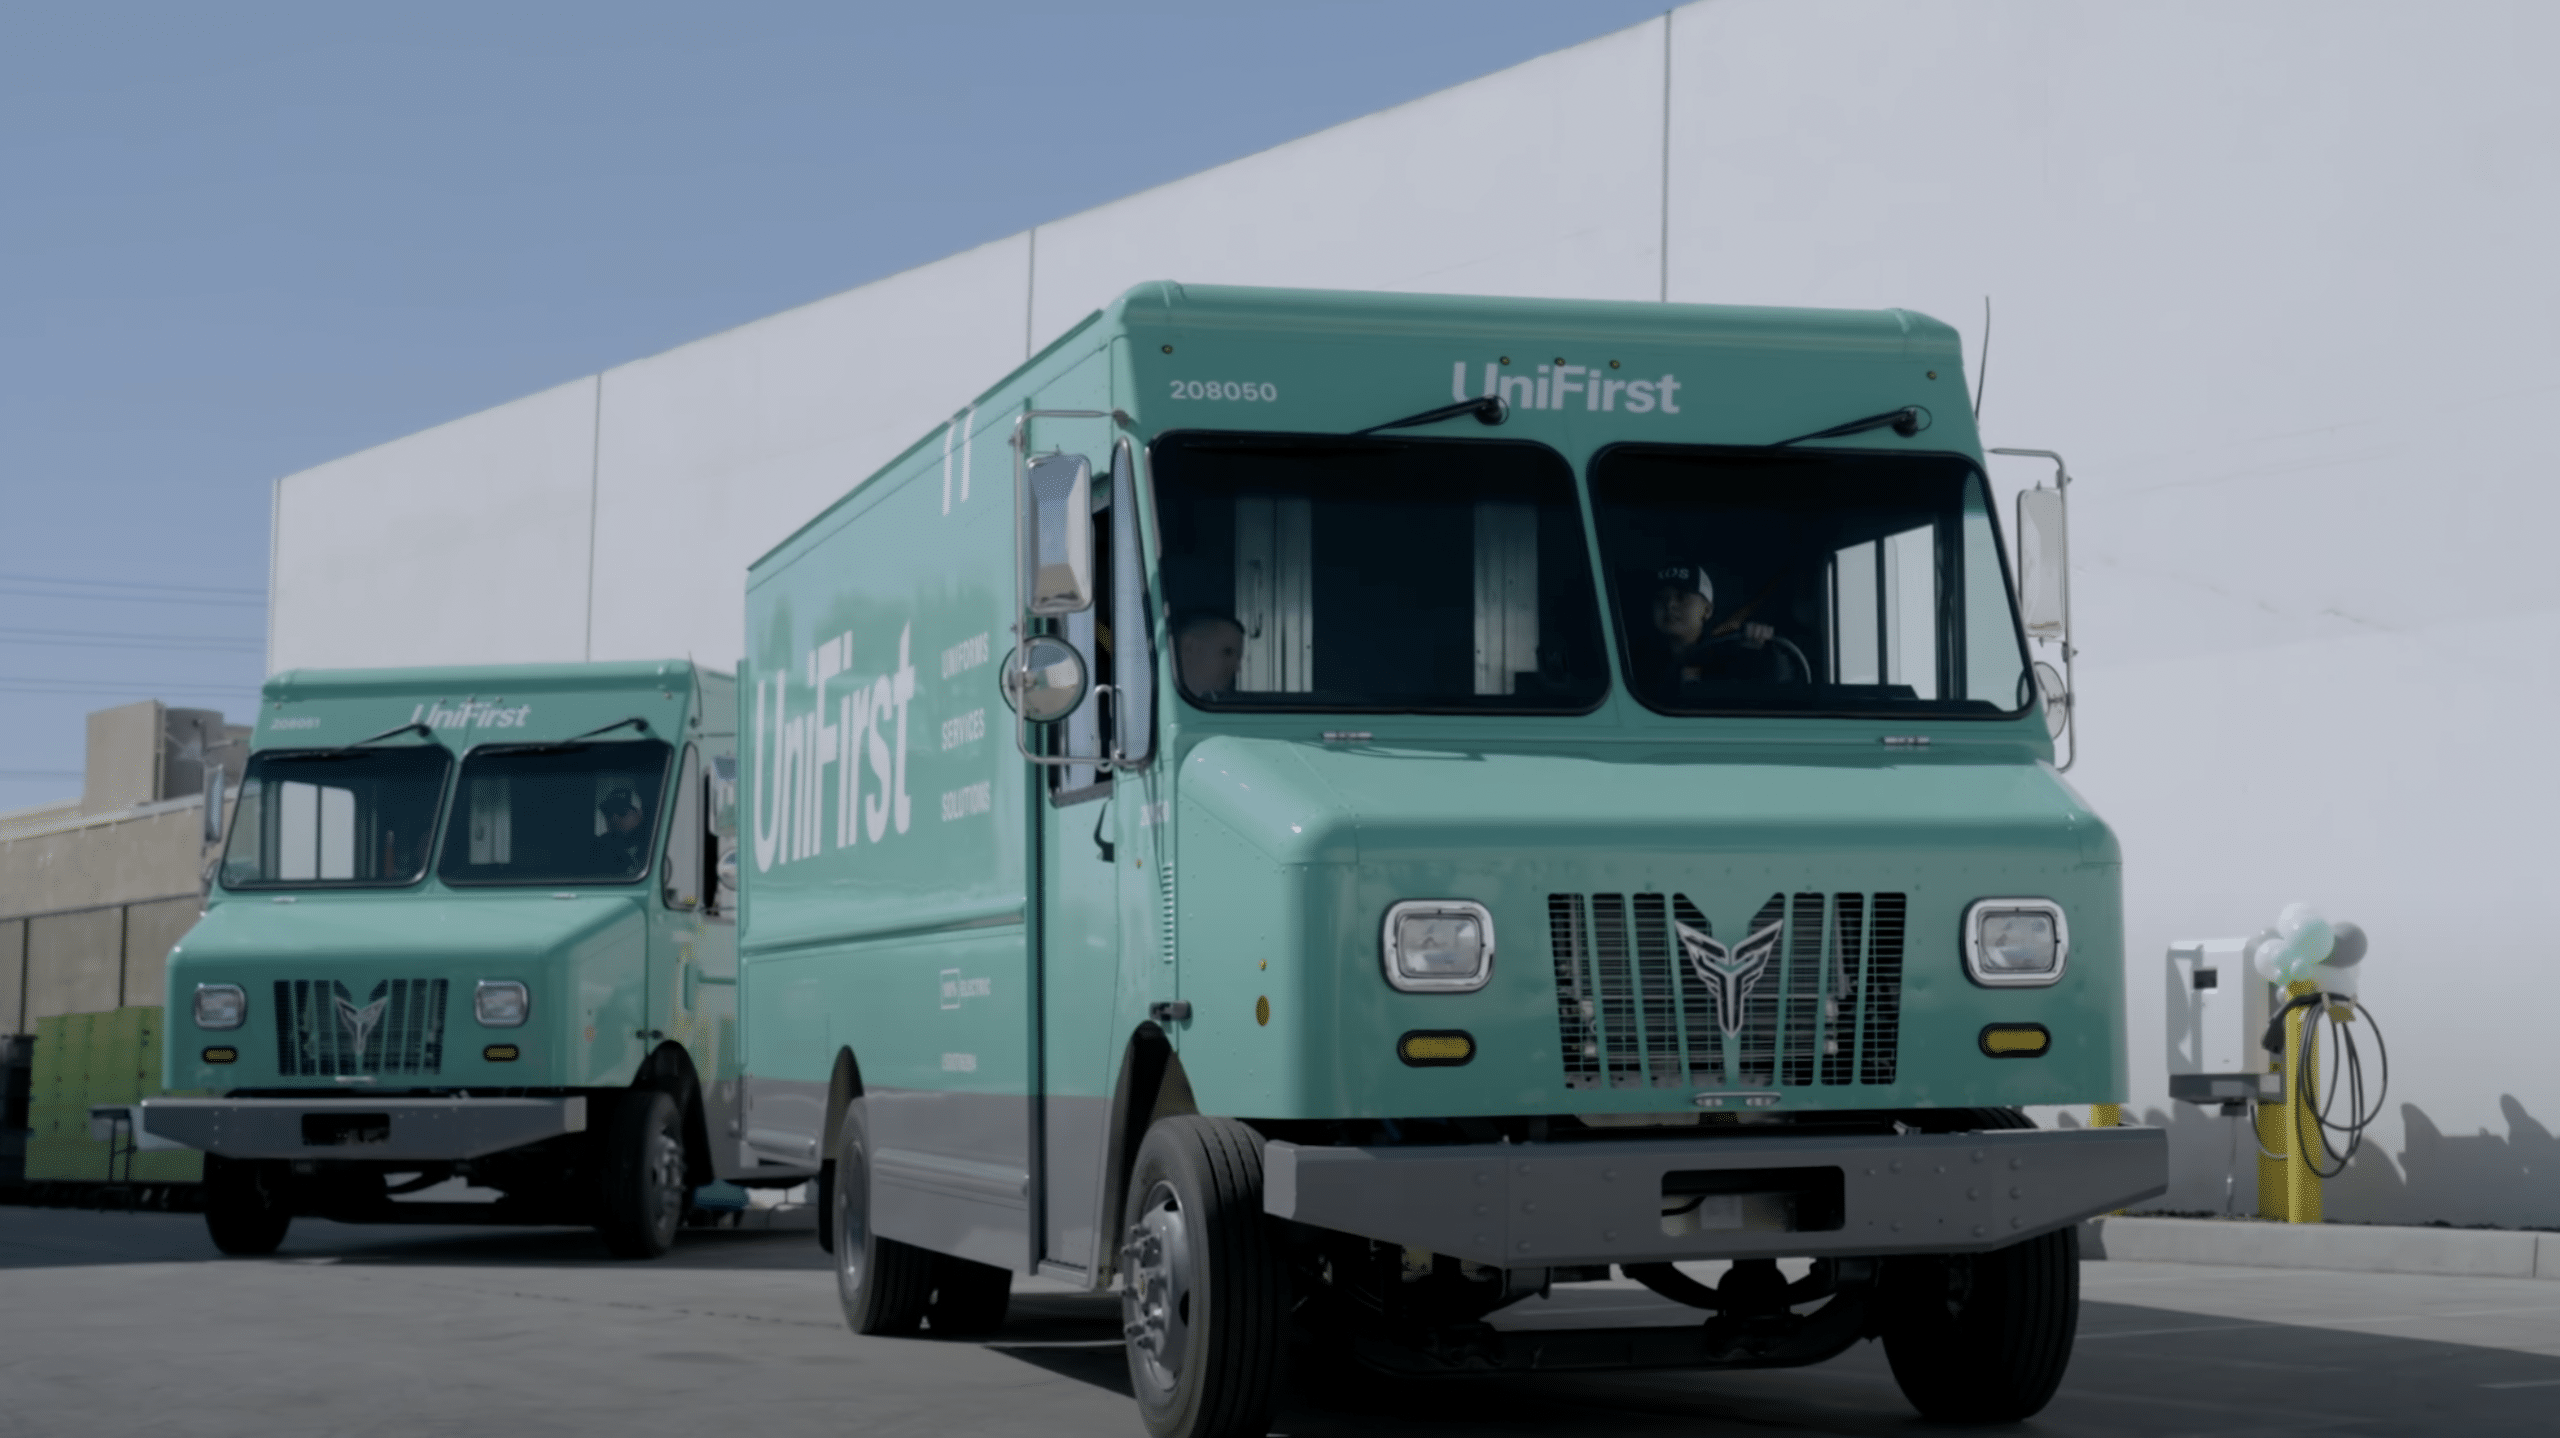 Xos, Inc. Delivers Initial Vehicles to UniFirst Corporation in Southern California